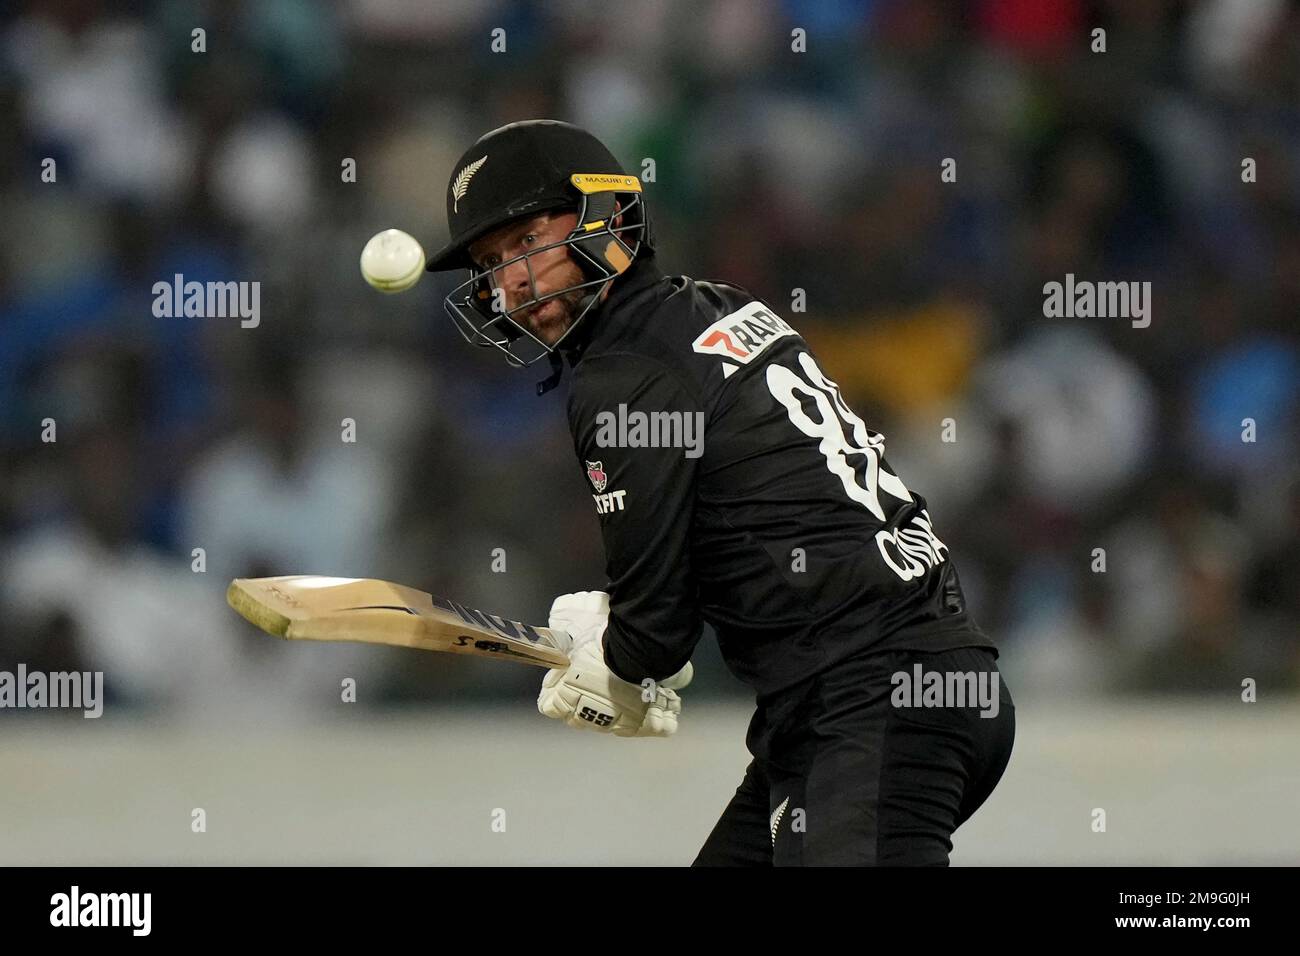 New Zealands Devon Conway plays a shot during the first one-day international cricket match between India and New Zealand in Hyderabad, India, Wednesday, Jan